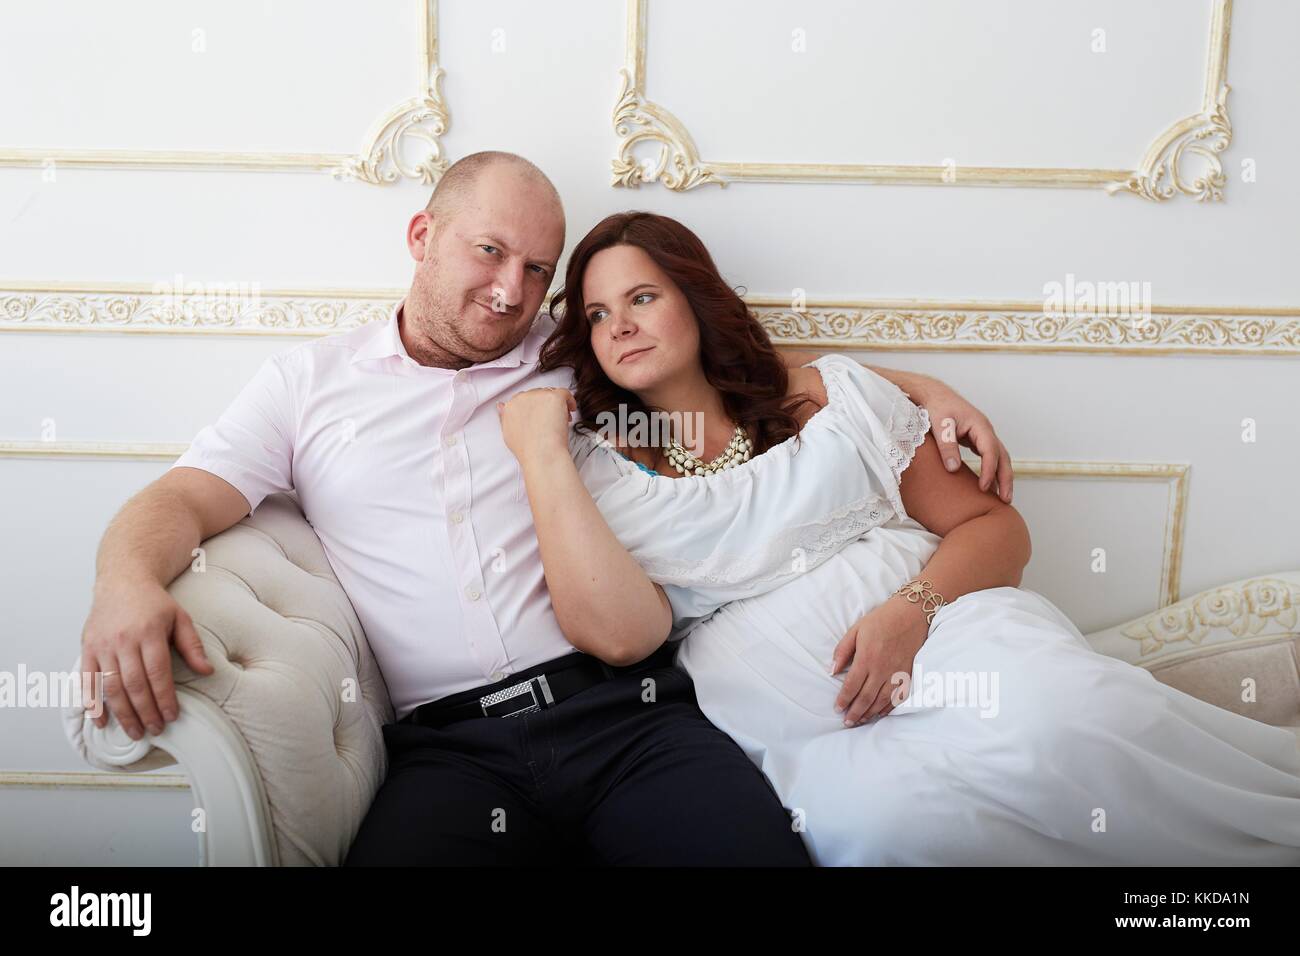 Man hugging smiling  pregnant woman in white dress  sitting on white sofa. Happy couple  on luxury decorated white background. Stock Photo